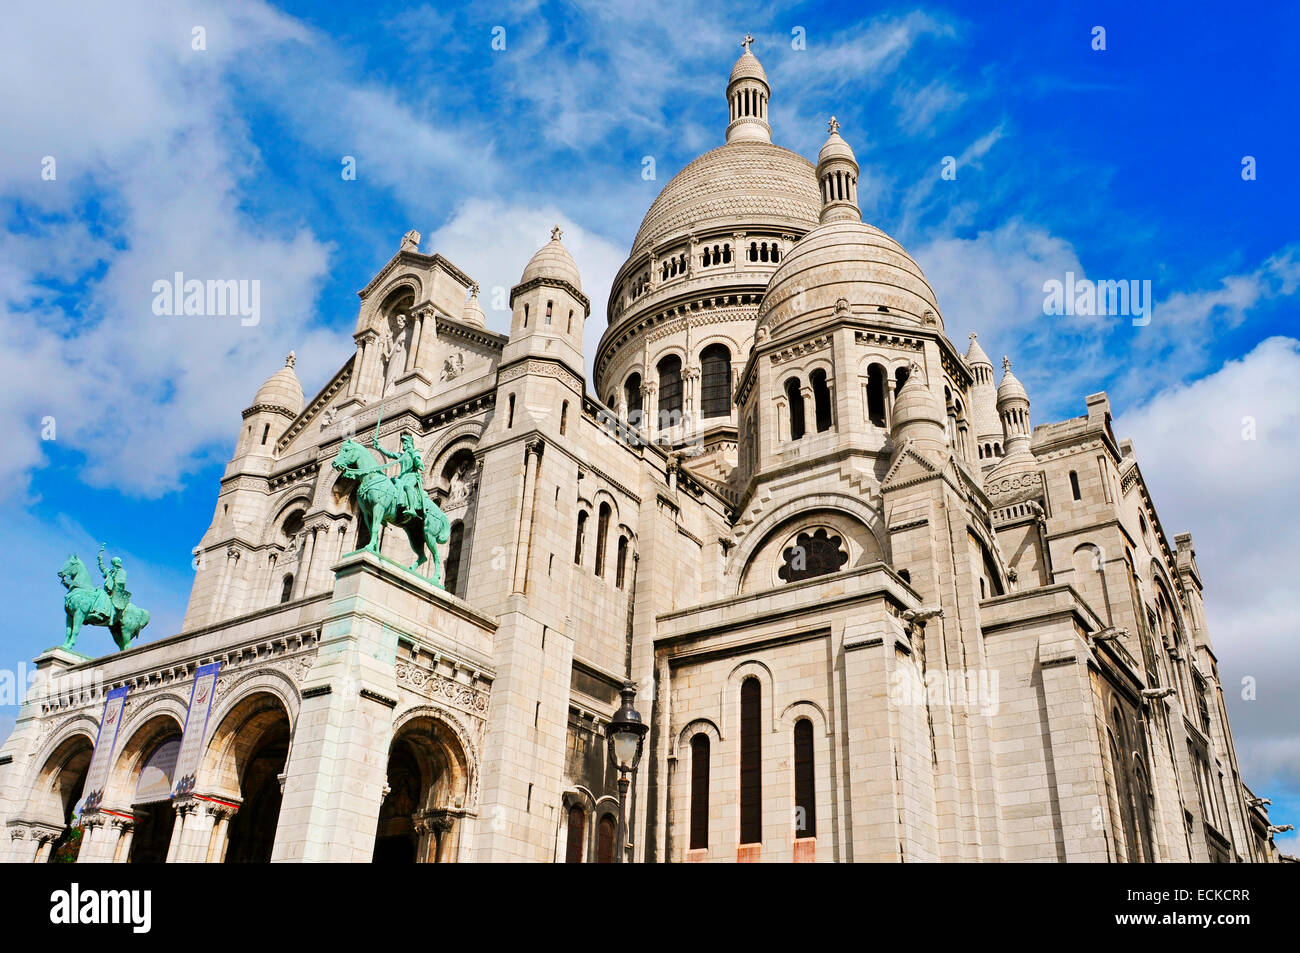 view of the Sacre-Coeur Basilica in Paris, France Stock Photo